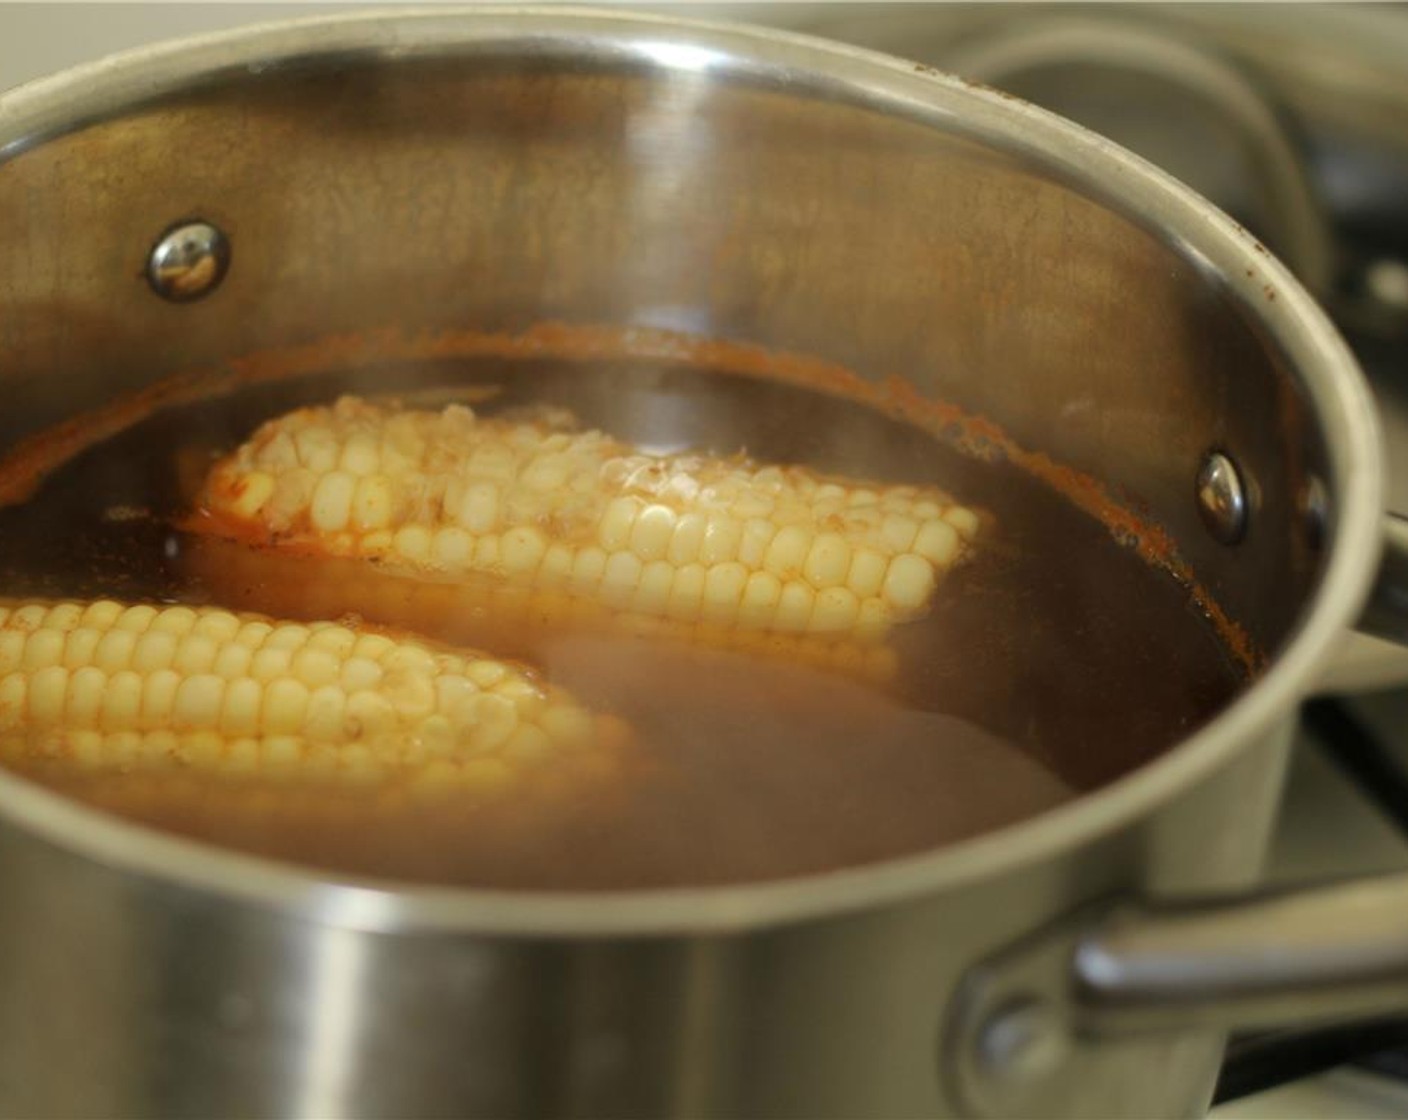 step 2 Cut the Corn (1 ear) in half. Add the Beer (12 fl oz), Water (3 cups), Onion (1/2), Garlic (1/2 clove), Old Bay® Seasoning (1 Tbsp) and corn into a large pot and simmer for 3 minutes uncovered.